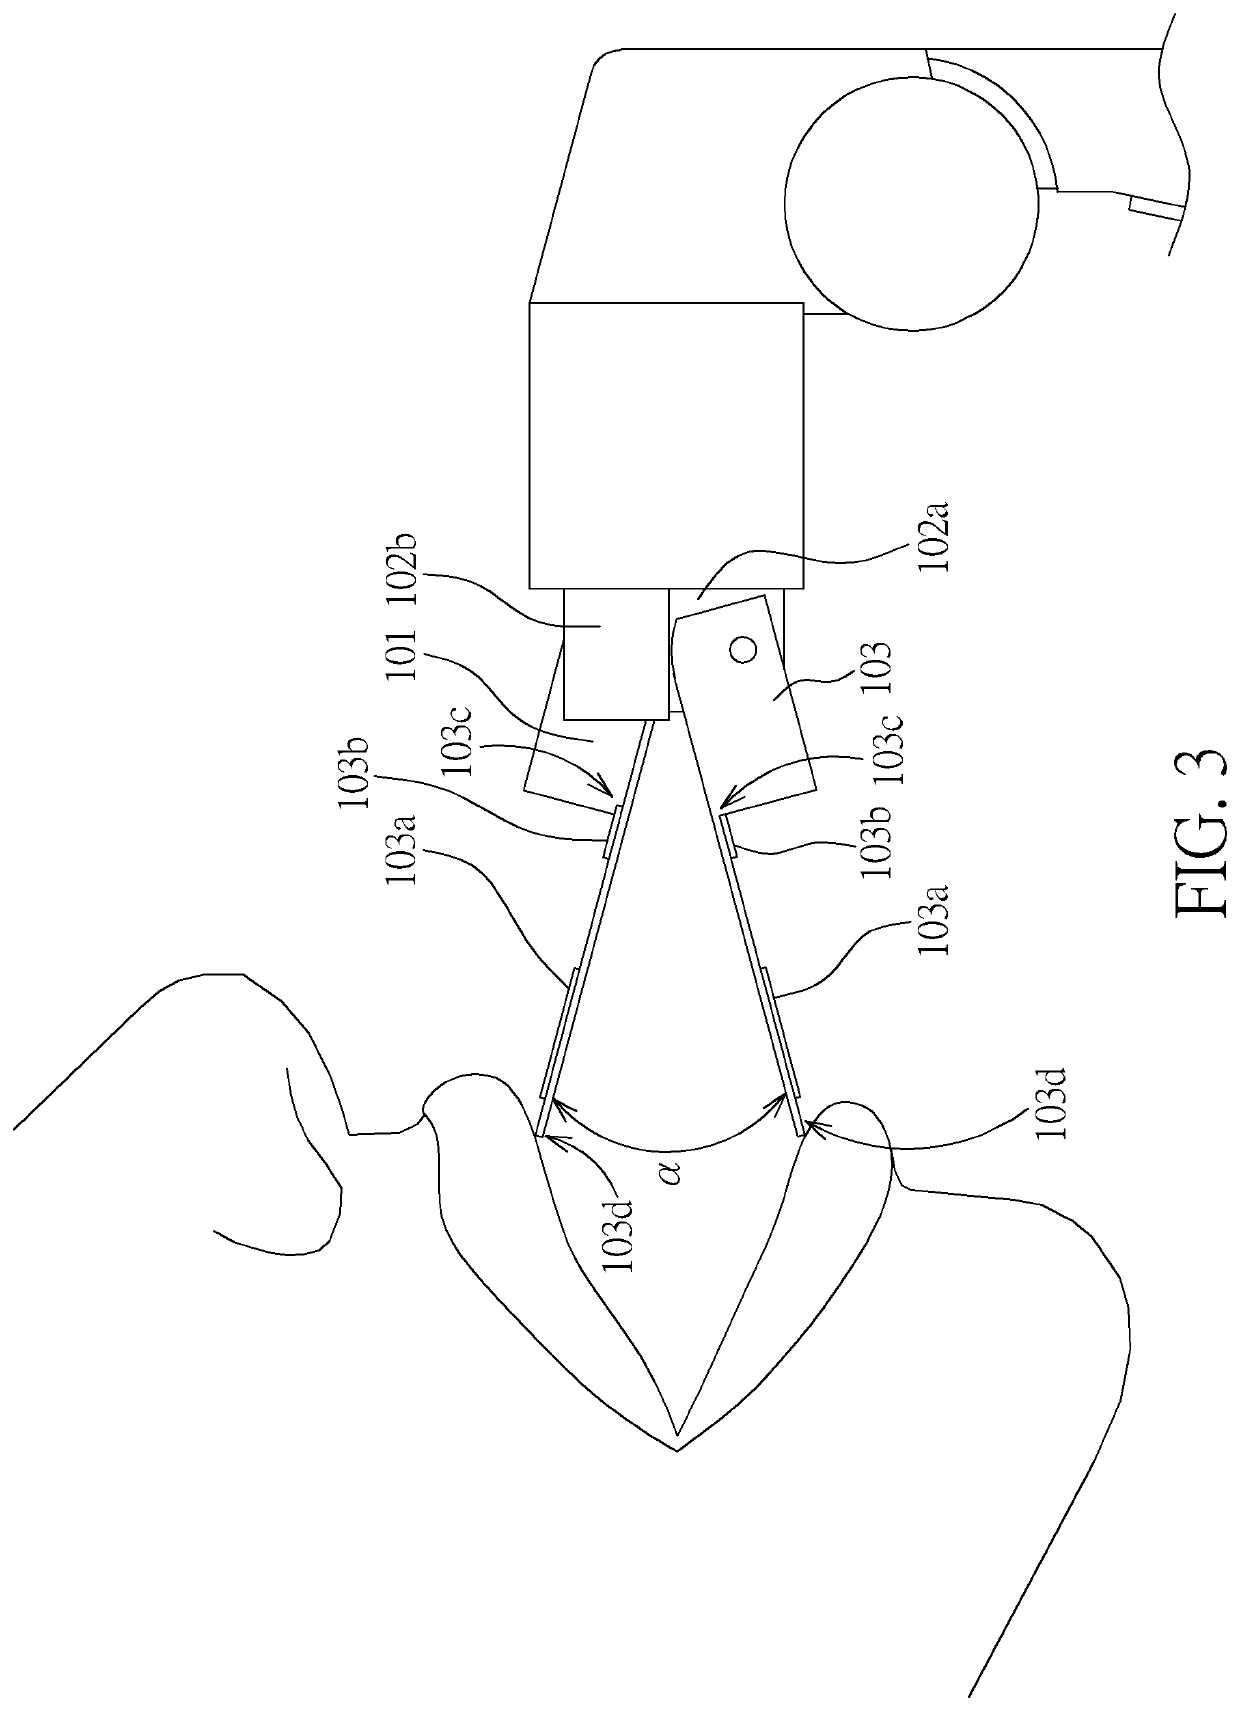 Oral rehabilitation device and medical treatment system therewith